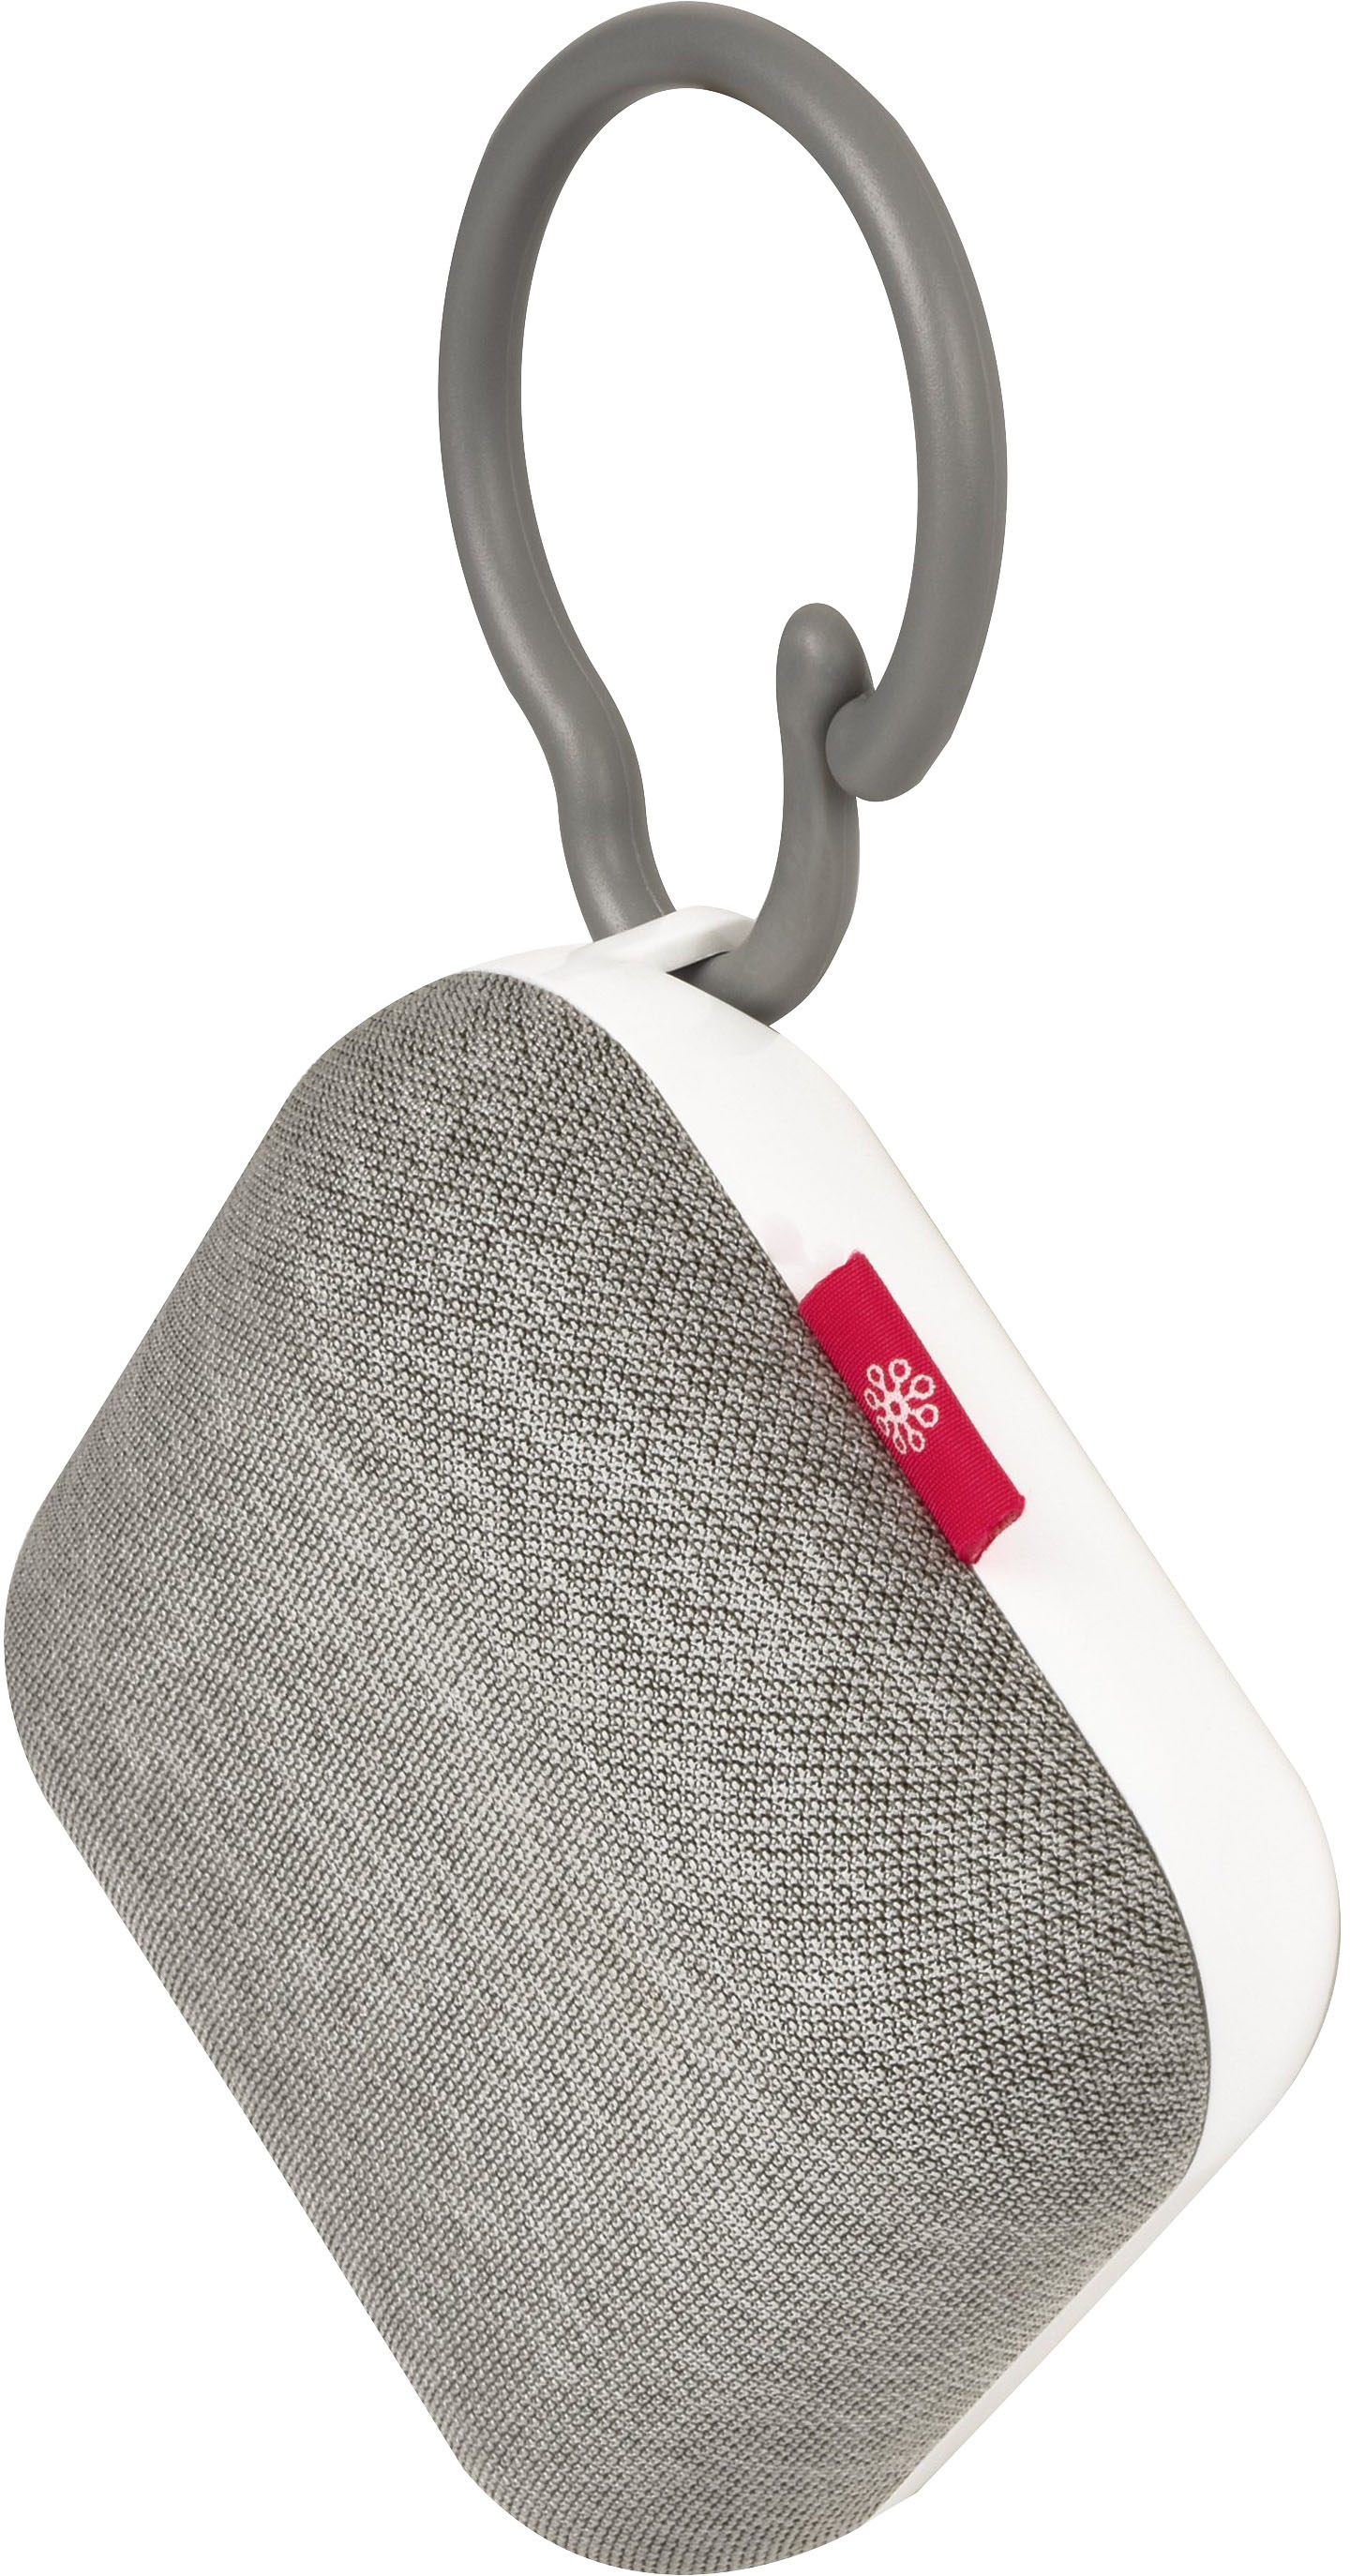 Left View: Project Nursery - Portable Sound Soother - Gray/White